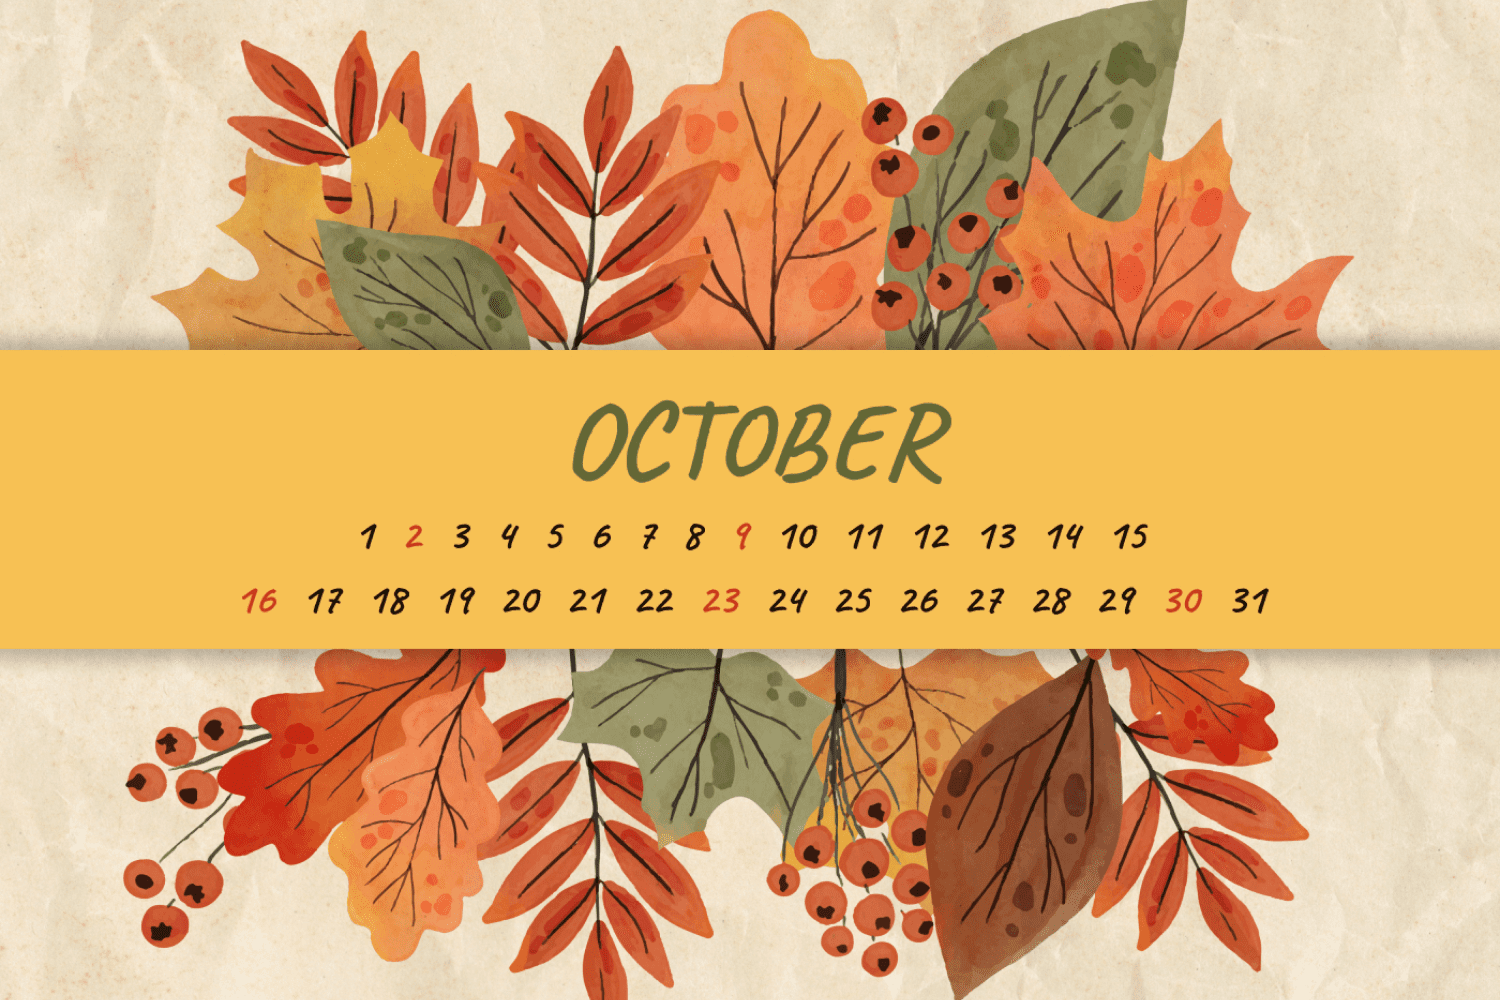 Calendar for October with a yellow background and painted leaves and rowan berries.